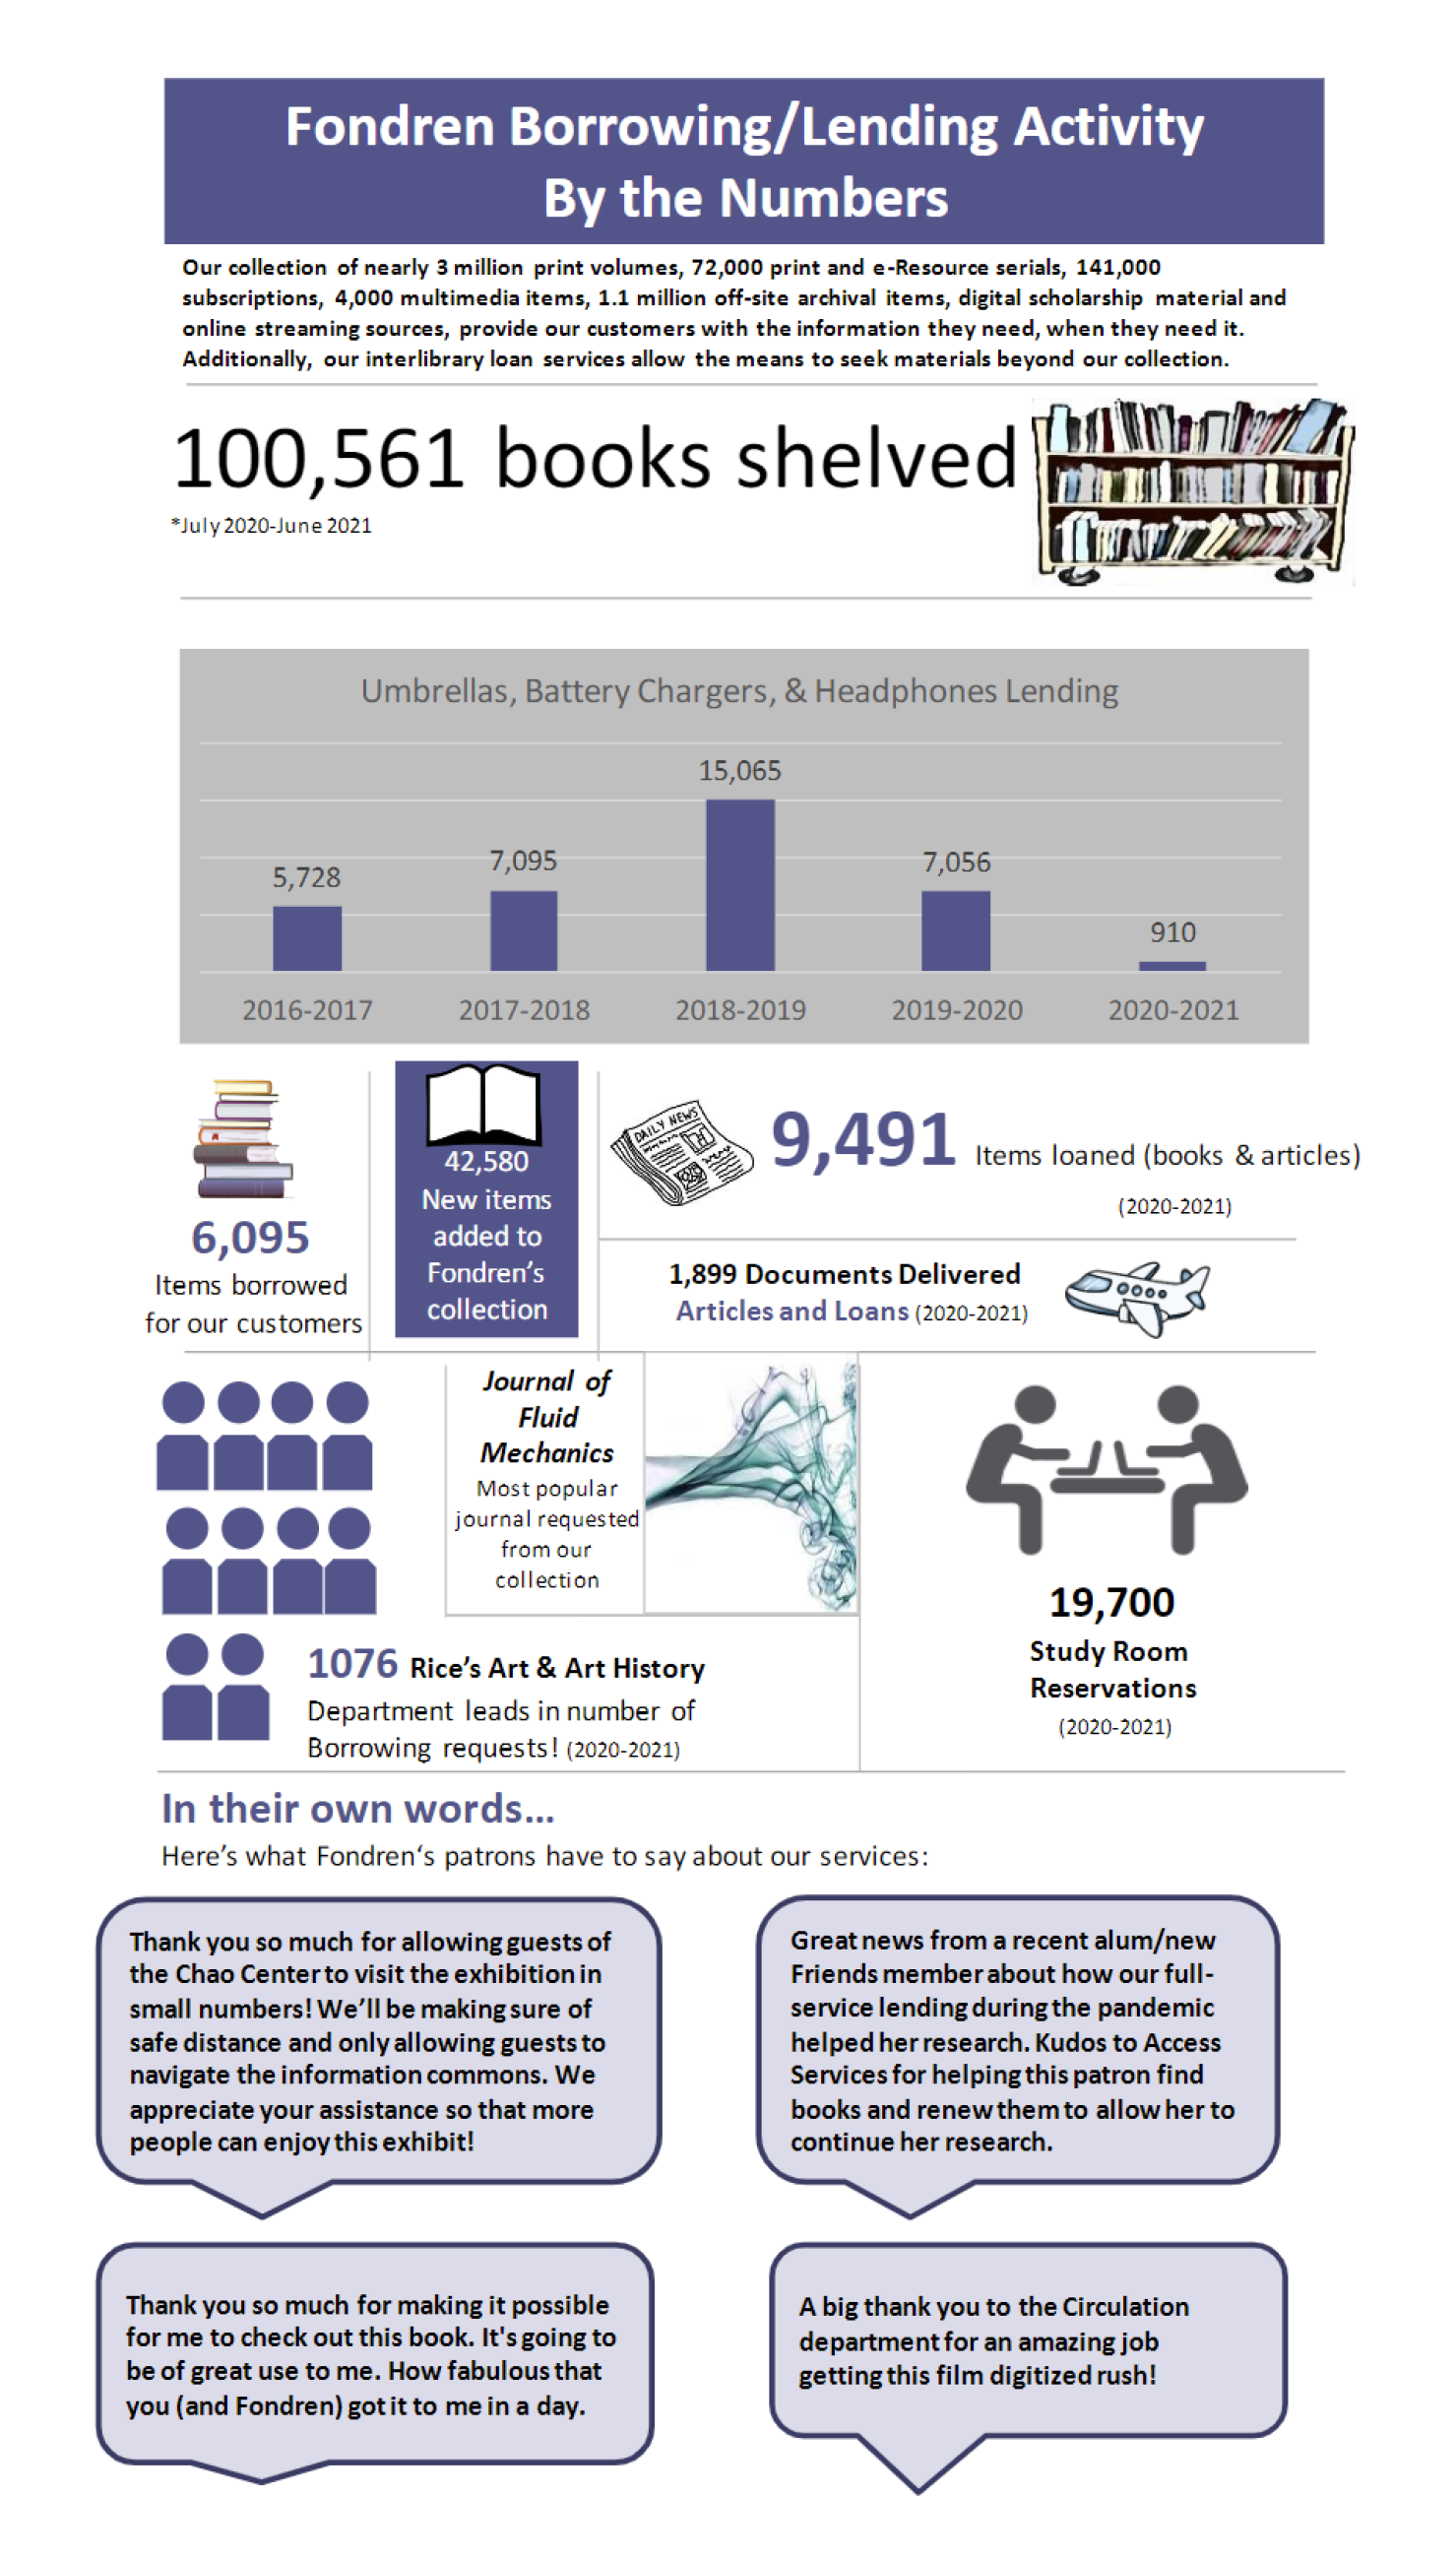 Fondren Borrowing/Lending By the Numbers Infographic